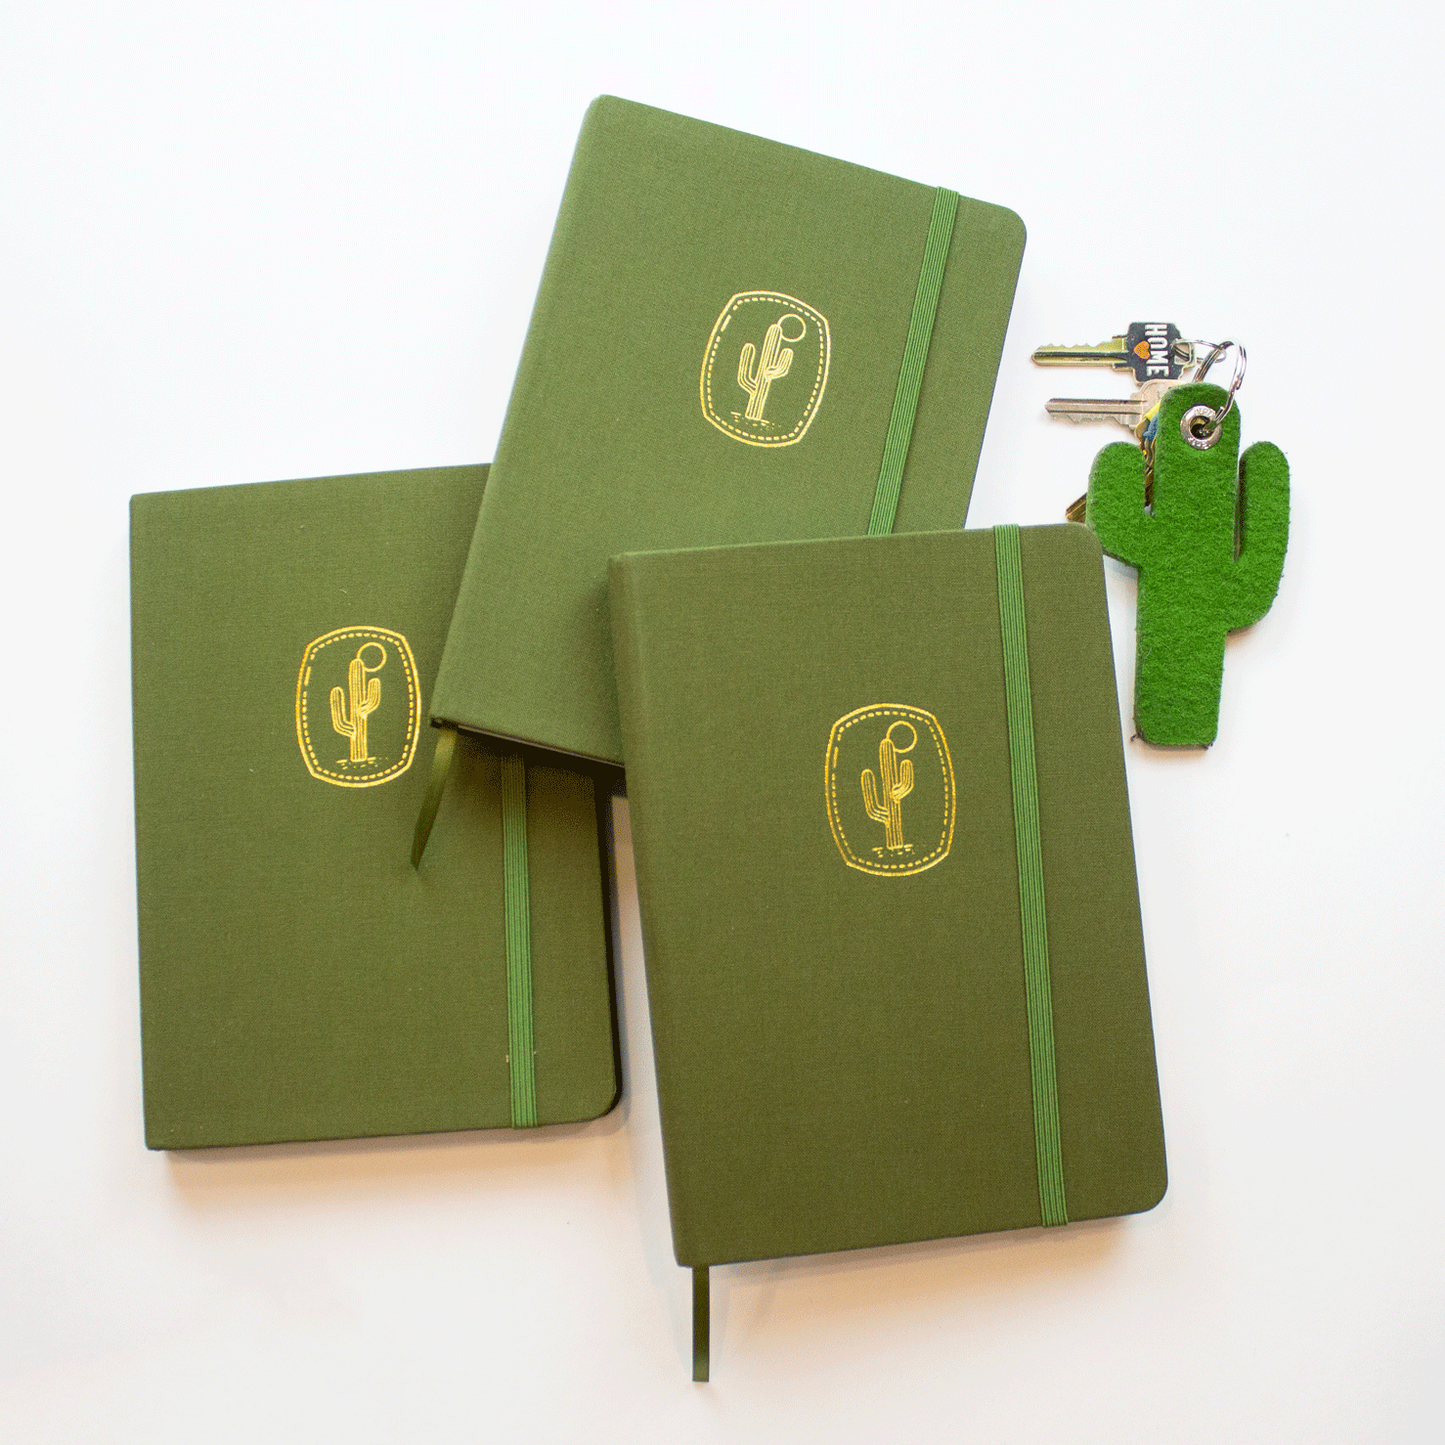 Three bobo BuJo dot grid Journals in Cactus green. The journals are piled together in a row, and their ribbon bookmarks and elastic closures are visible. A green saguaro cactus keychain with keys sits to their right.